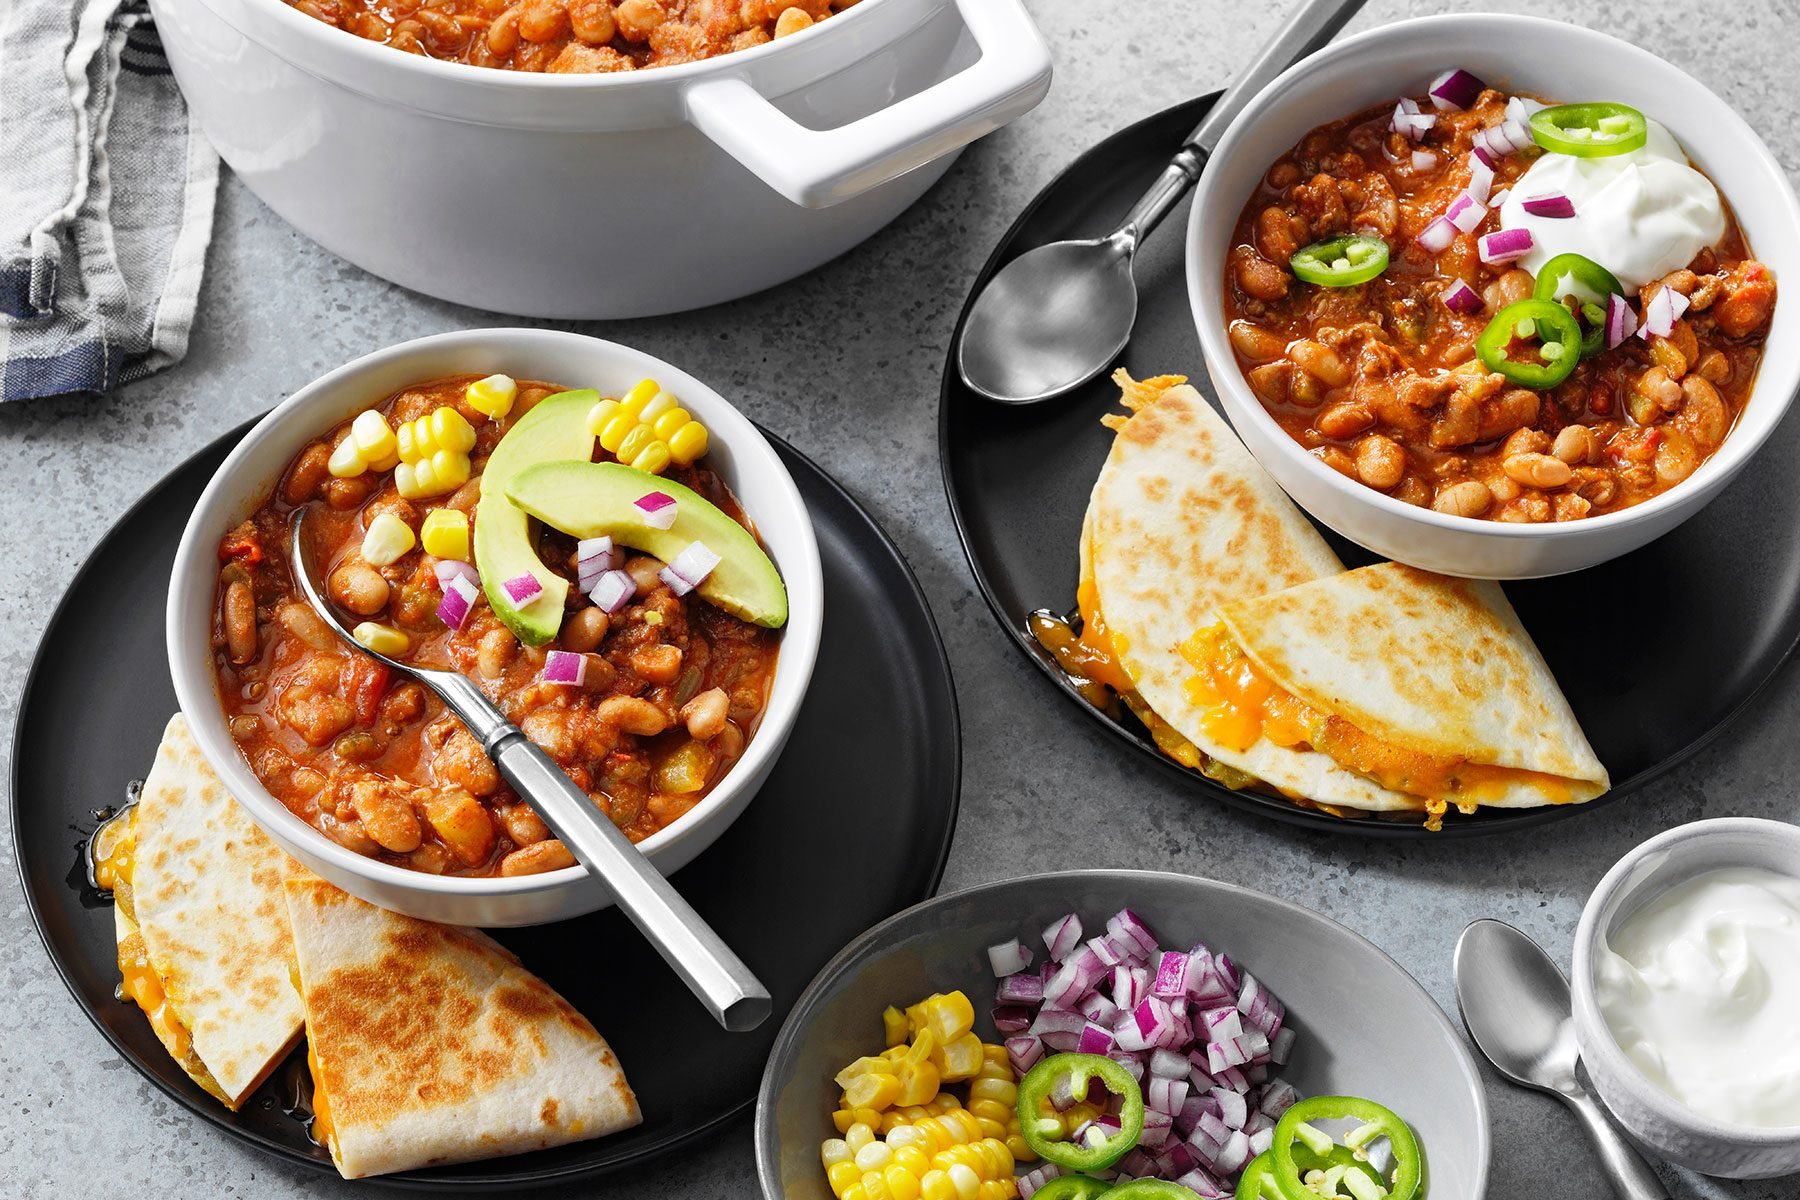 Pinto Bean Chili served with veggies and pita bread 